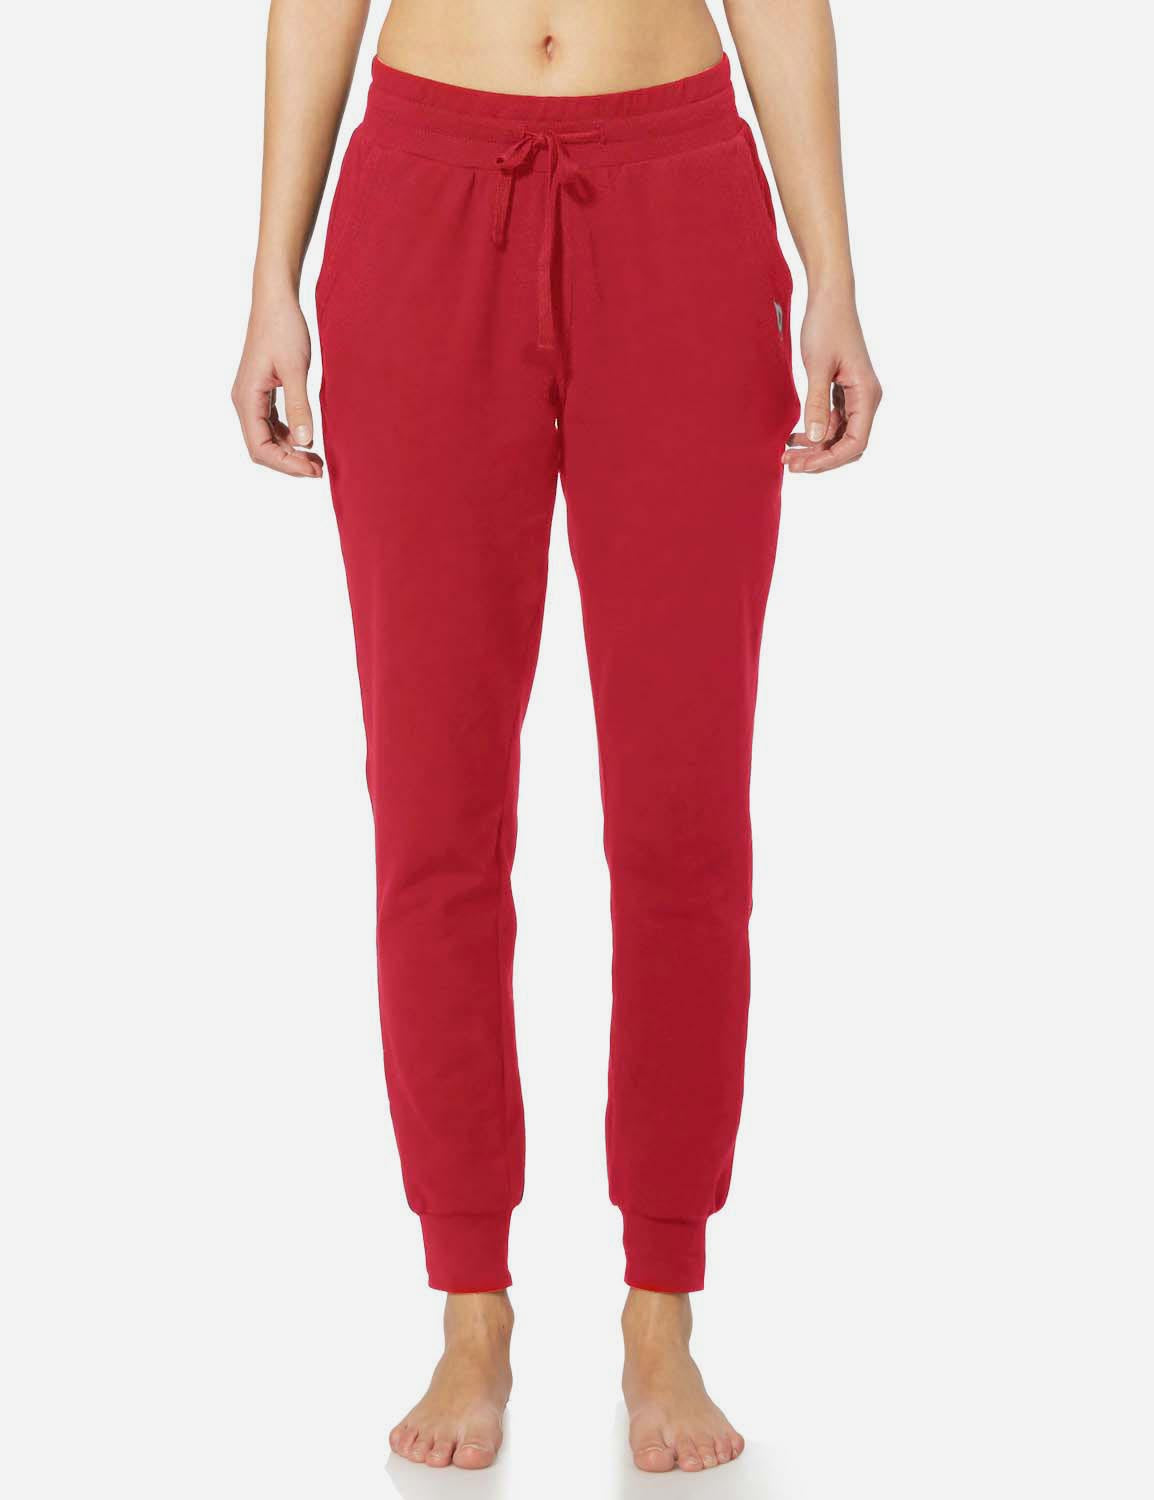 Baleaf Women's Cotton Comfy Pocketed & Tapered Weekend Joggers abh103 Rose Red Front